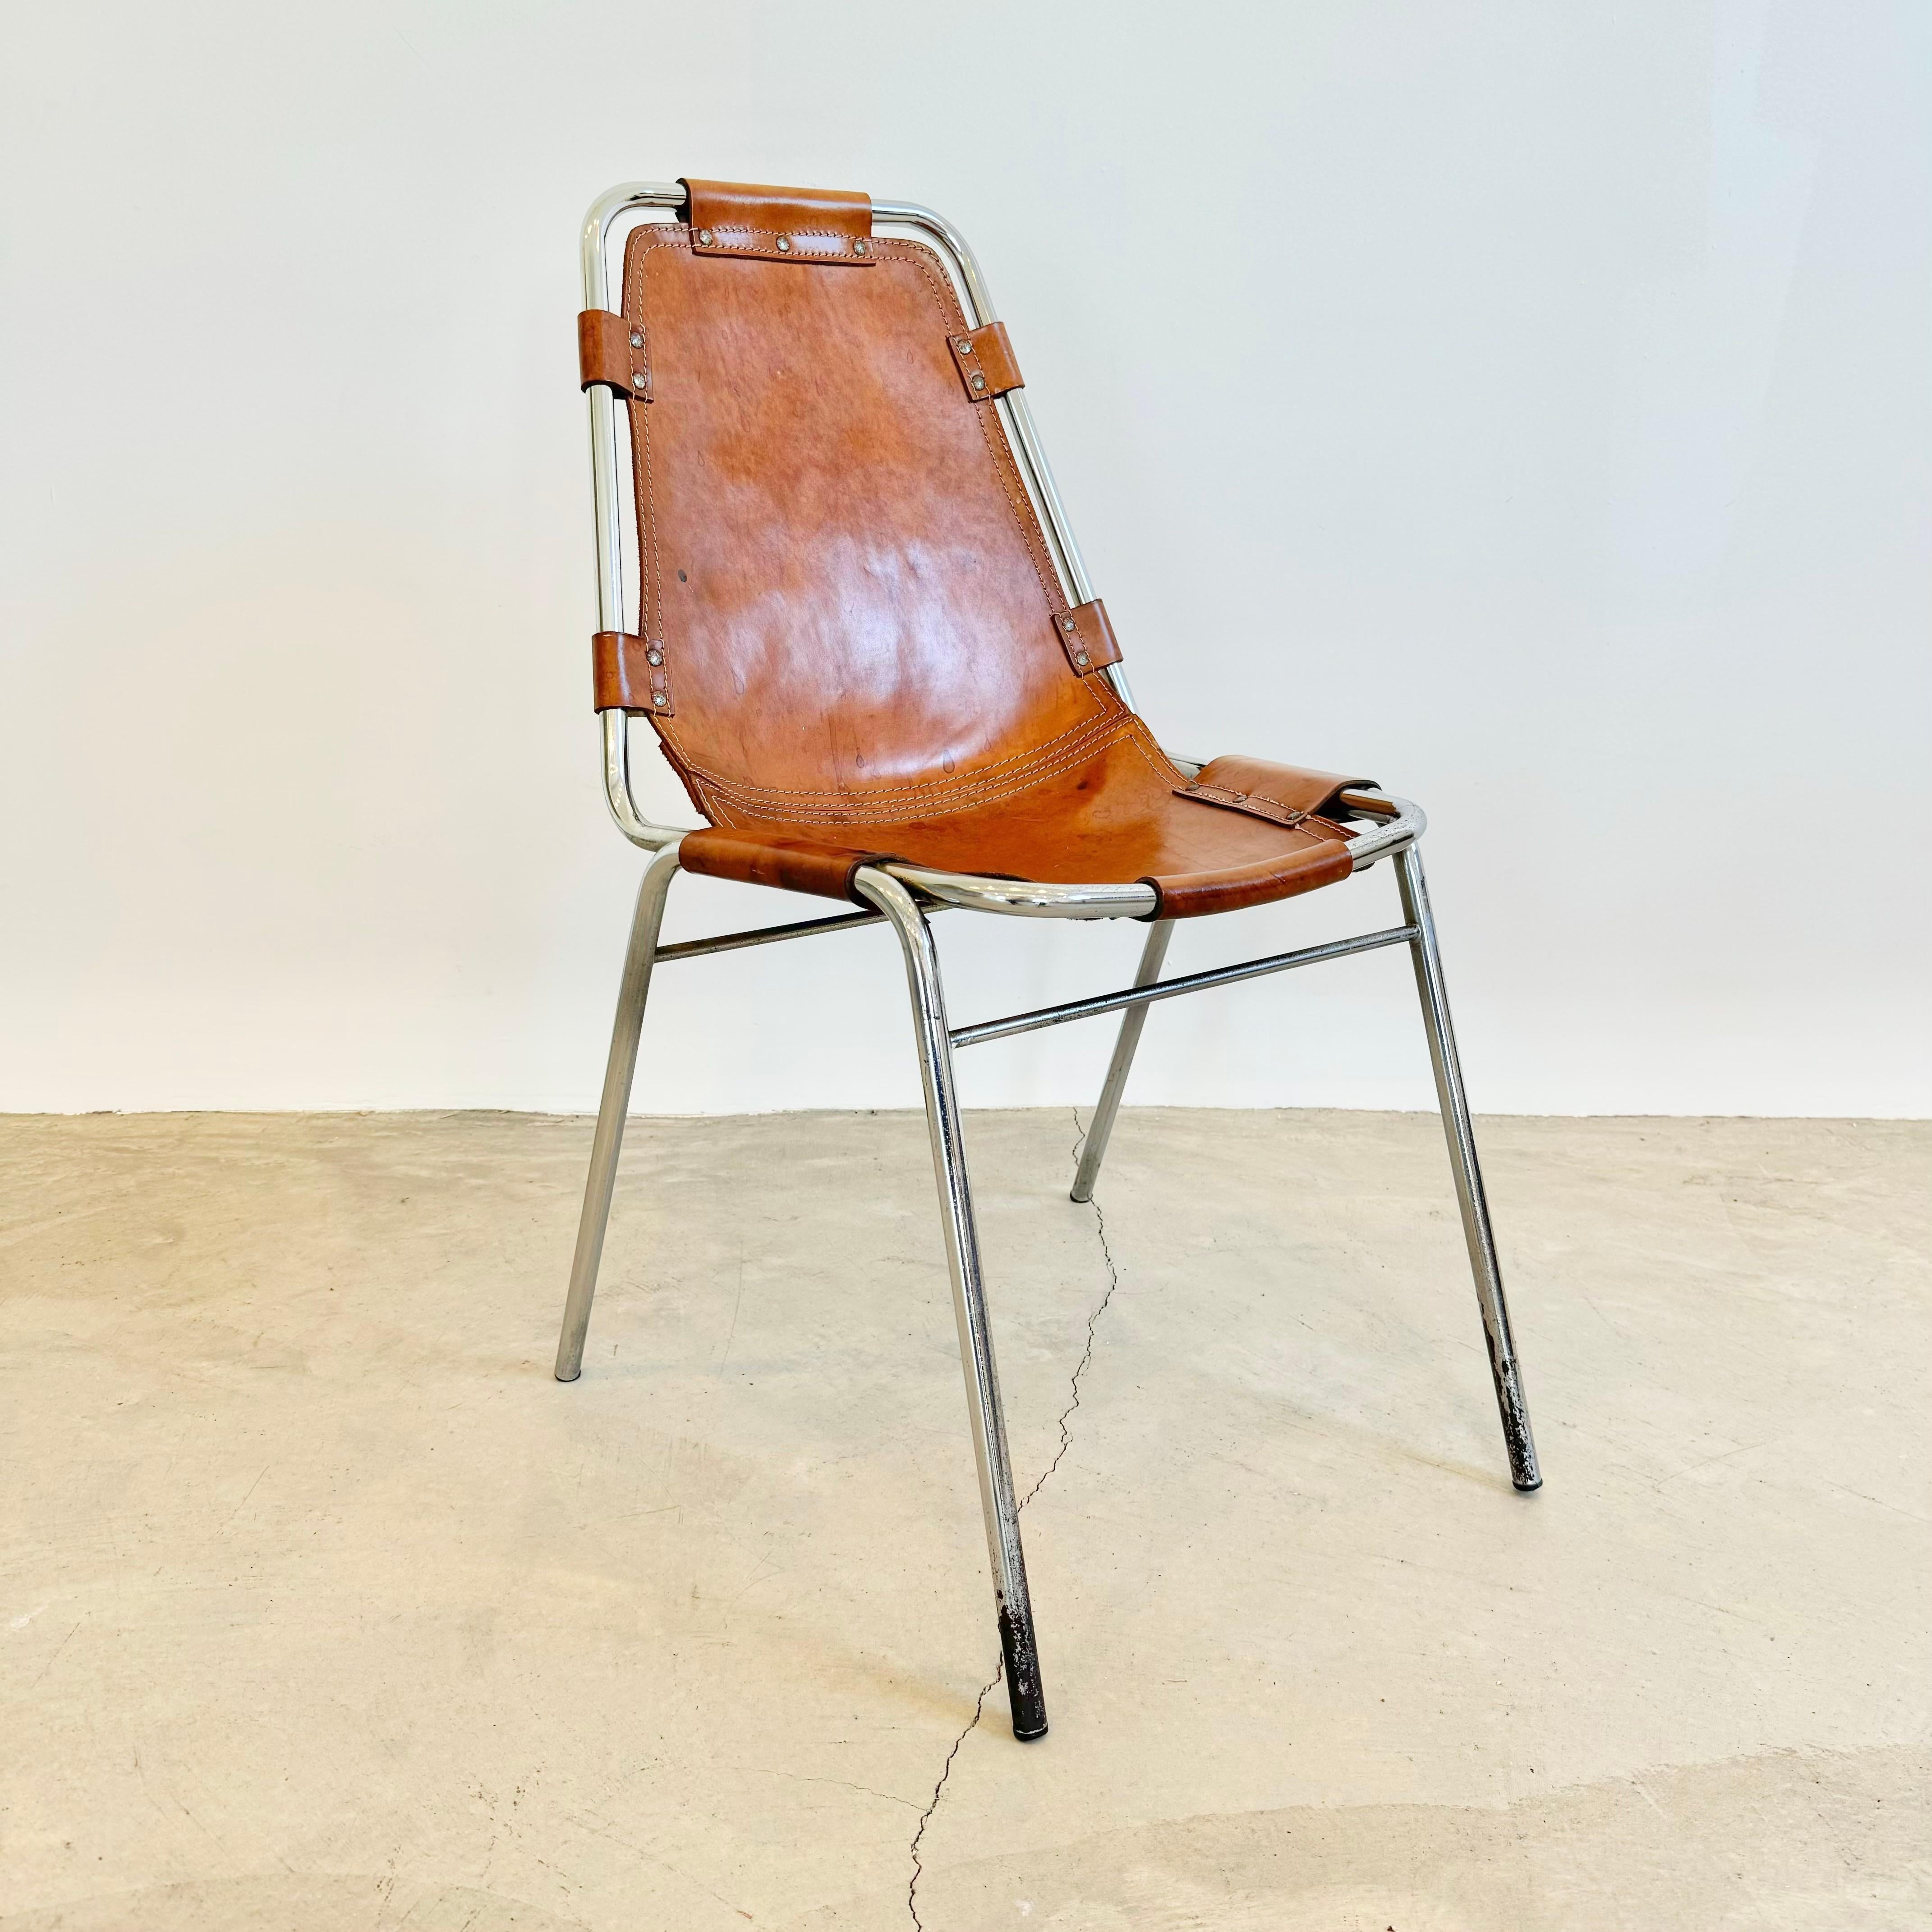 Stunning set of 8 dining chairs chosen by Charlotte Perriand for the Les Arcs ski resort. 1960s France. Superior example of chairs currently on the market. Tubular chrome frame with saddle leather held by rivets. Great condition to chrome. Fantastic